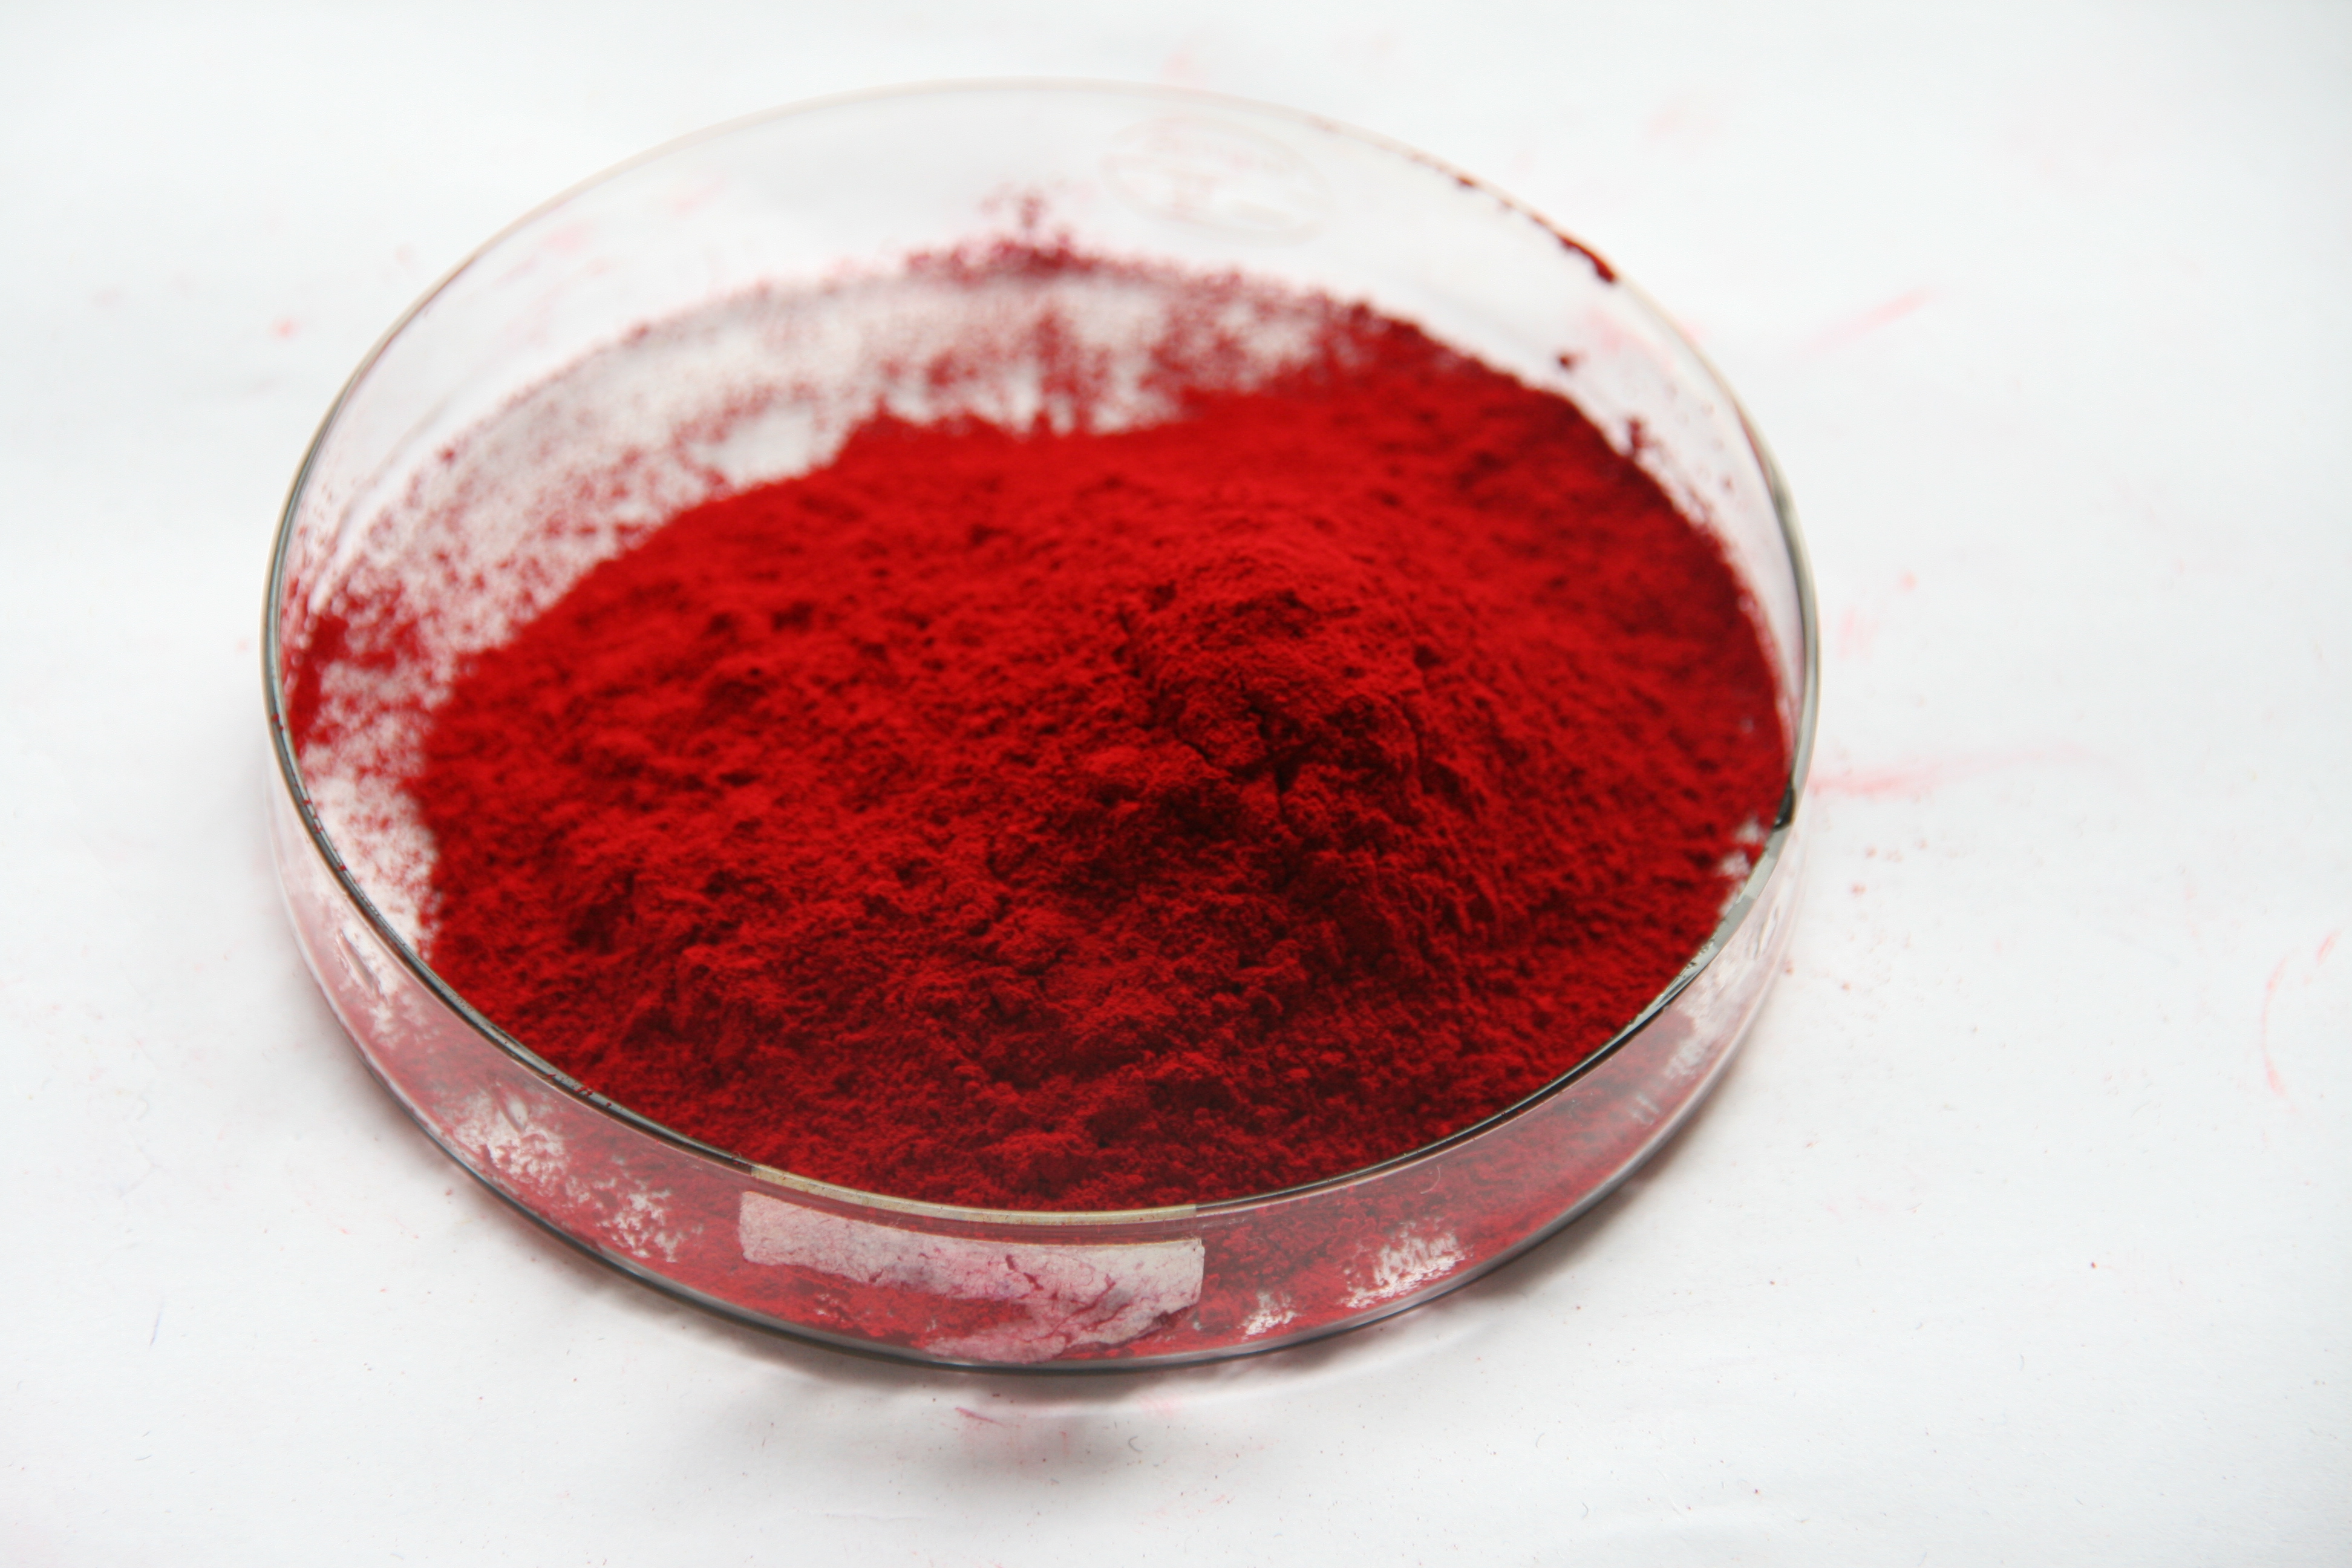 Solvent Red 132 High Purity Metal Complex Solvent Dye for Aluminum Foil Coloring